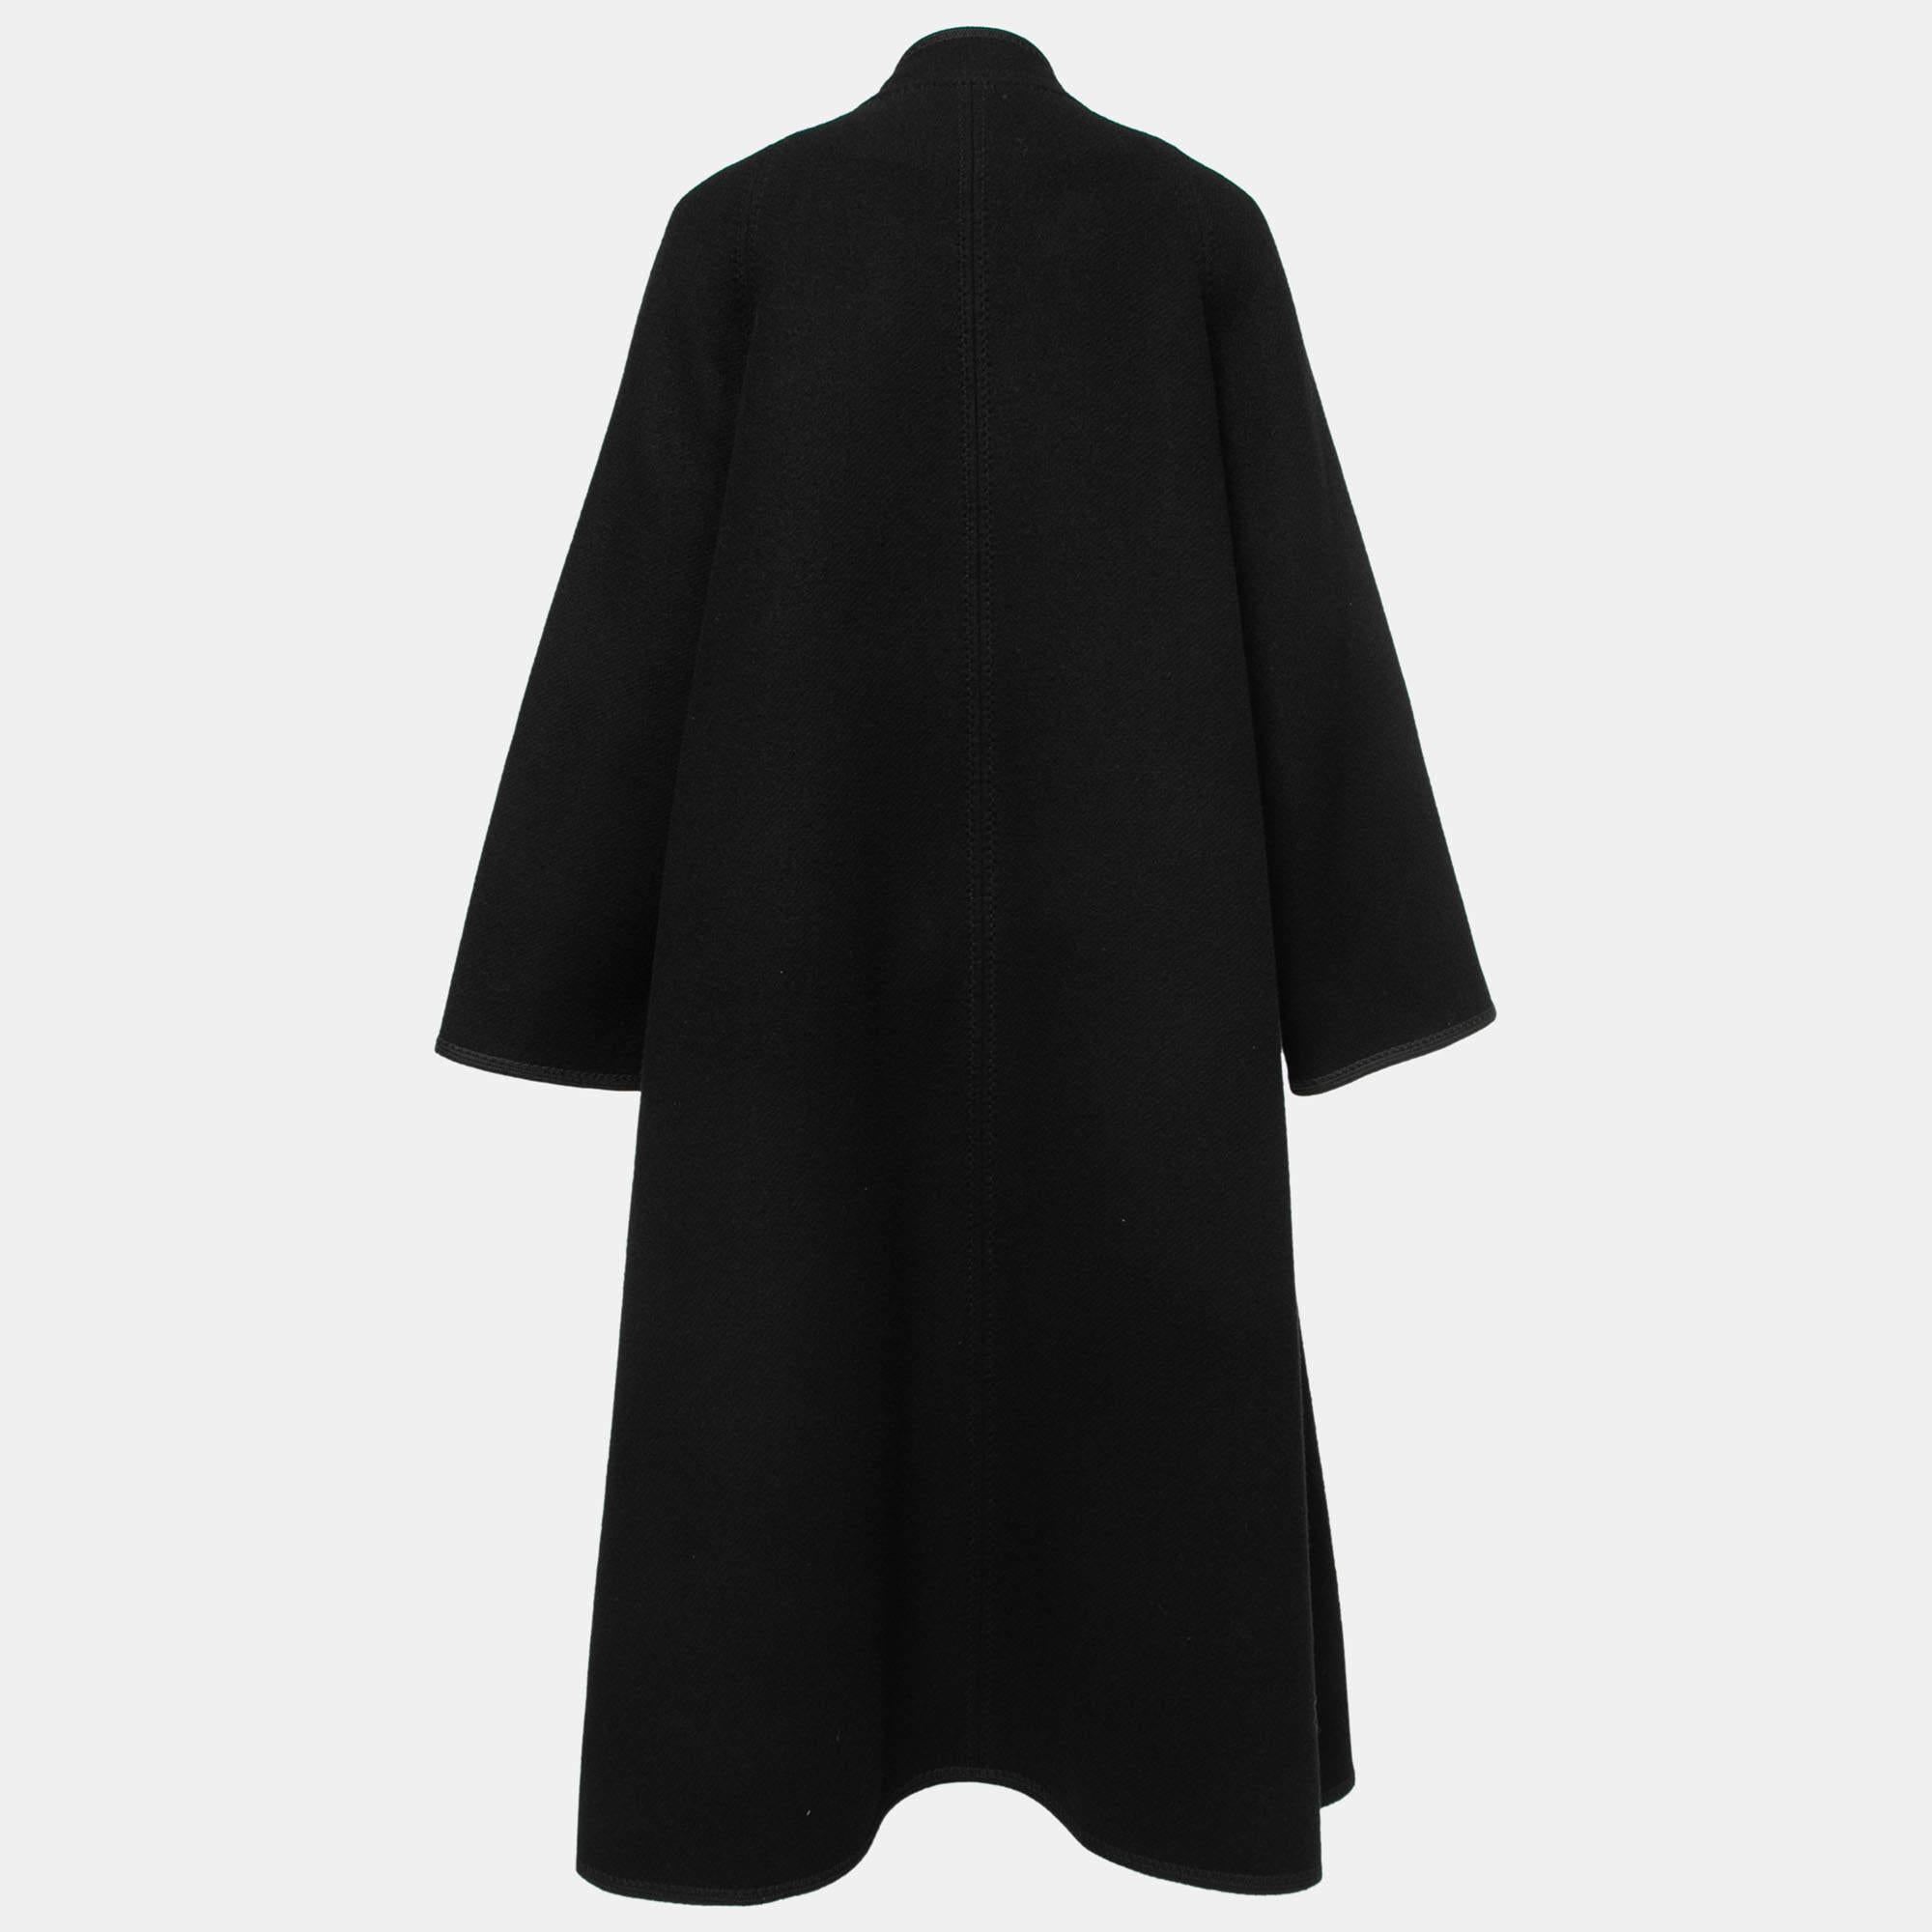 Coats like this one are an amazing accessory to polish your attire. Made from good fabrics in a black shade and detailed with a noticeable design, this Chloe long coat ensures your looks are always on point.

